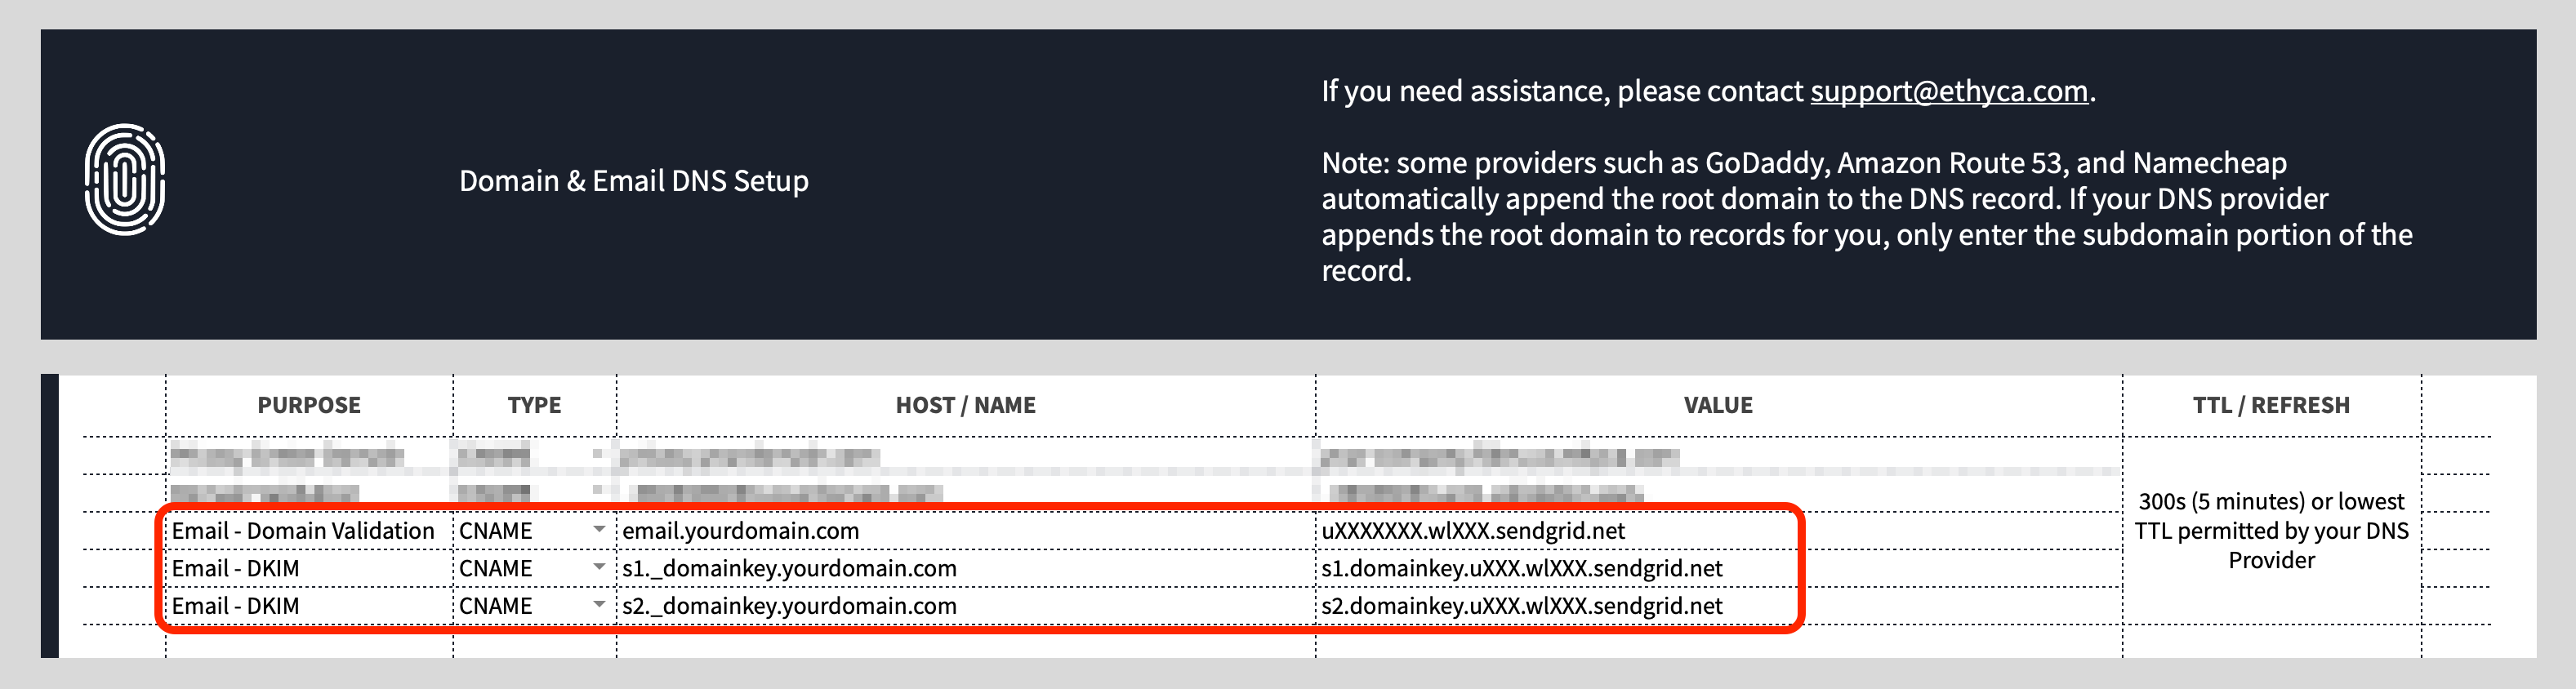 Email domain name verification - example DNS records